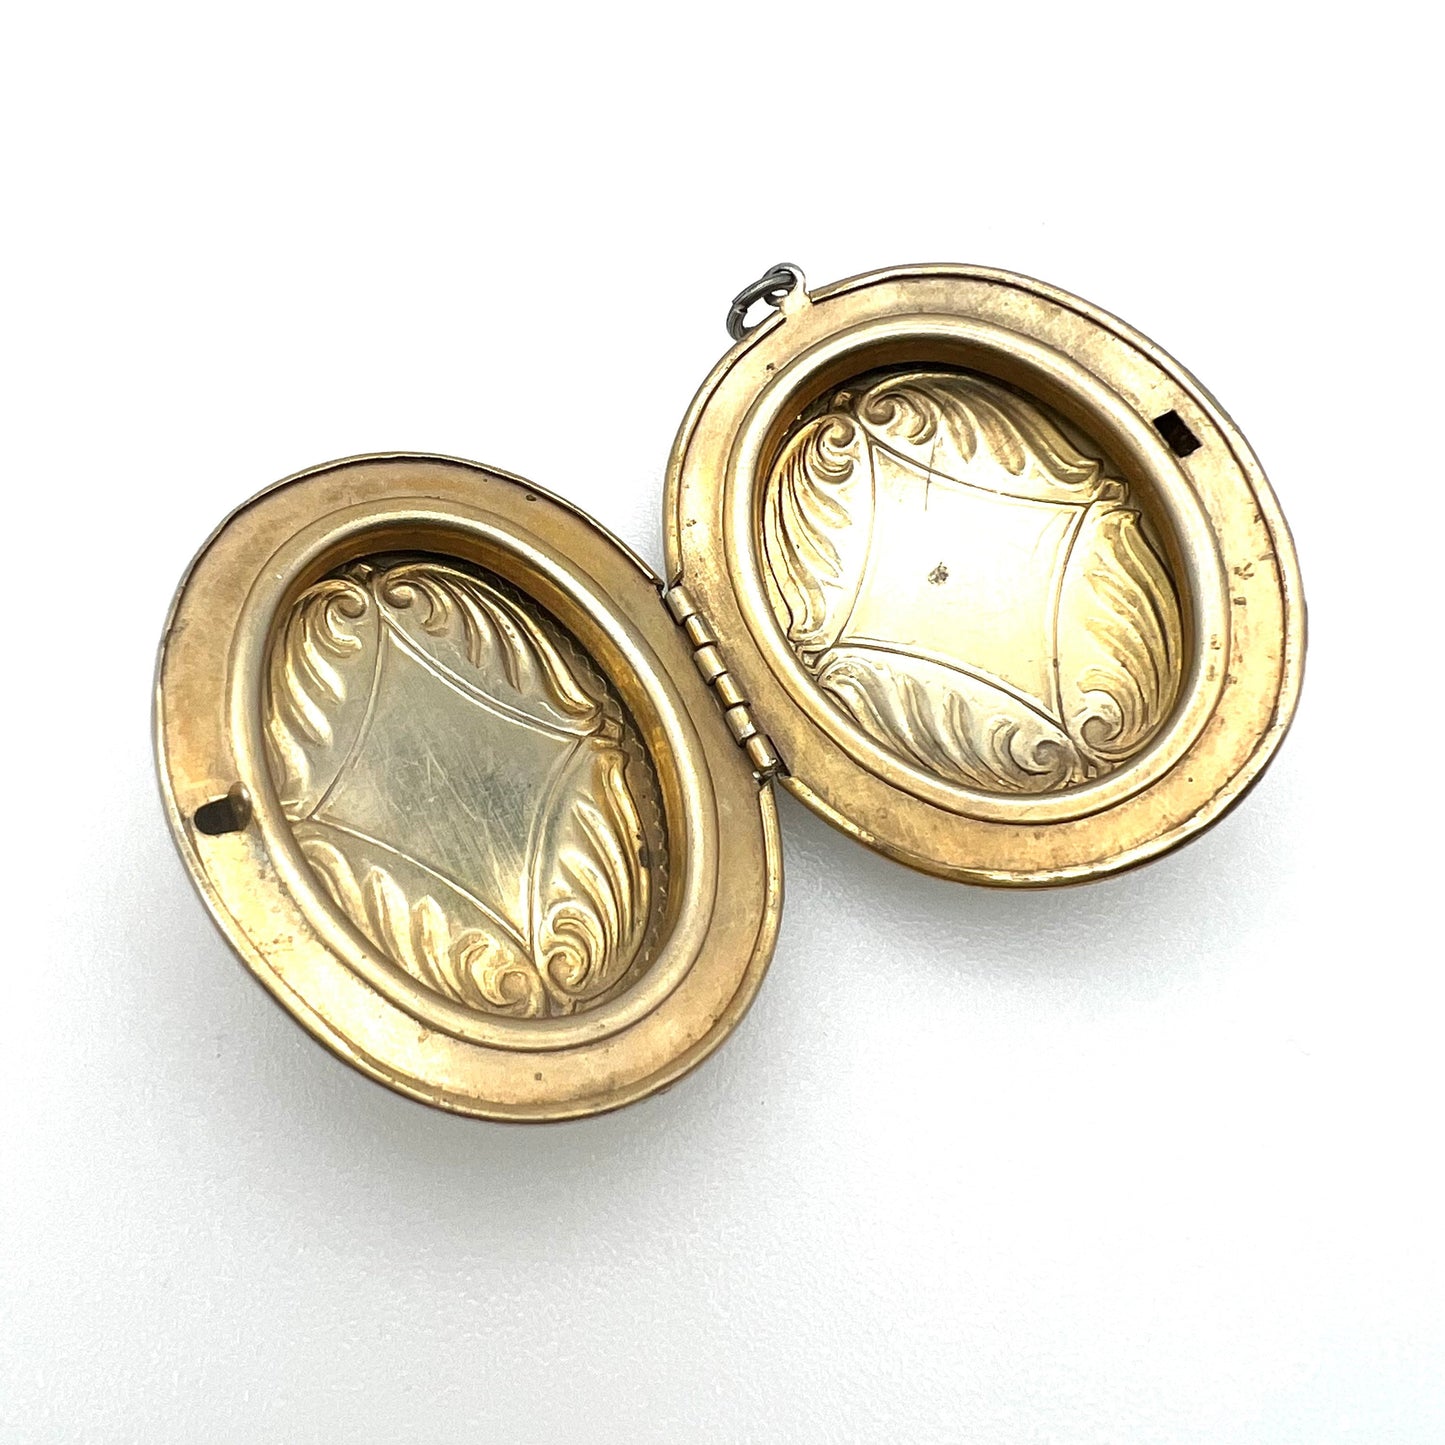 Silver Plated Double Sided Repousse Gilt Lined Large Locket